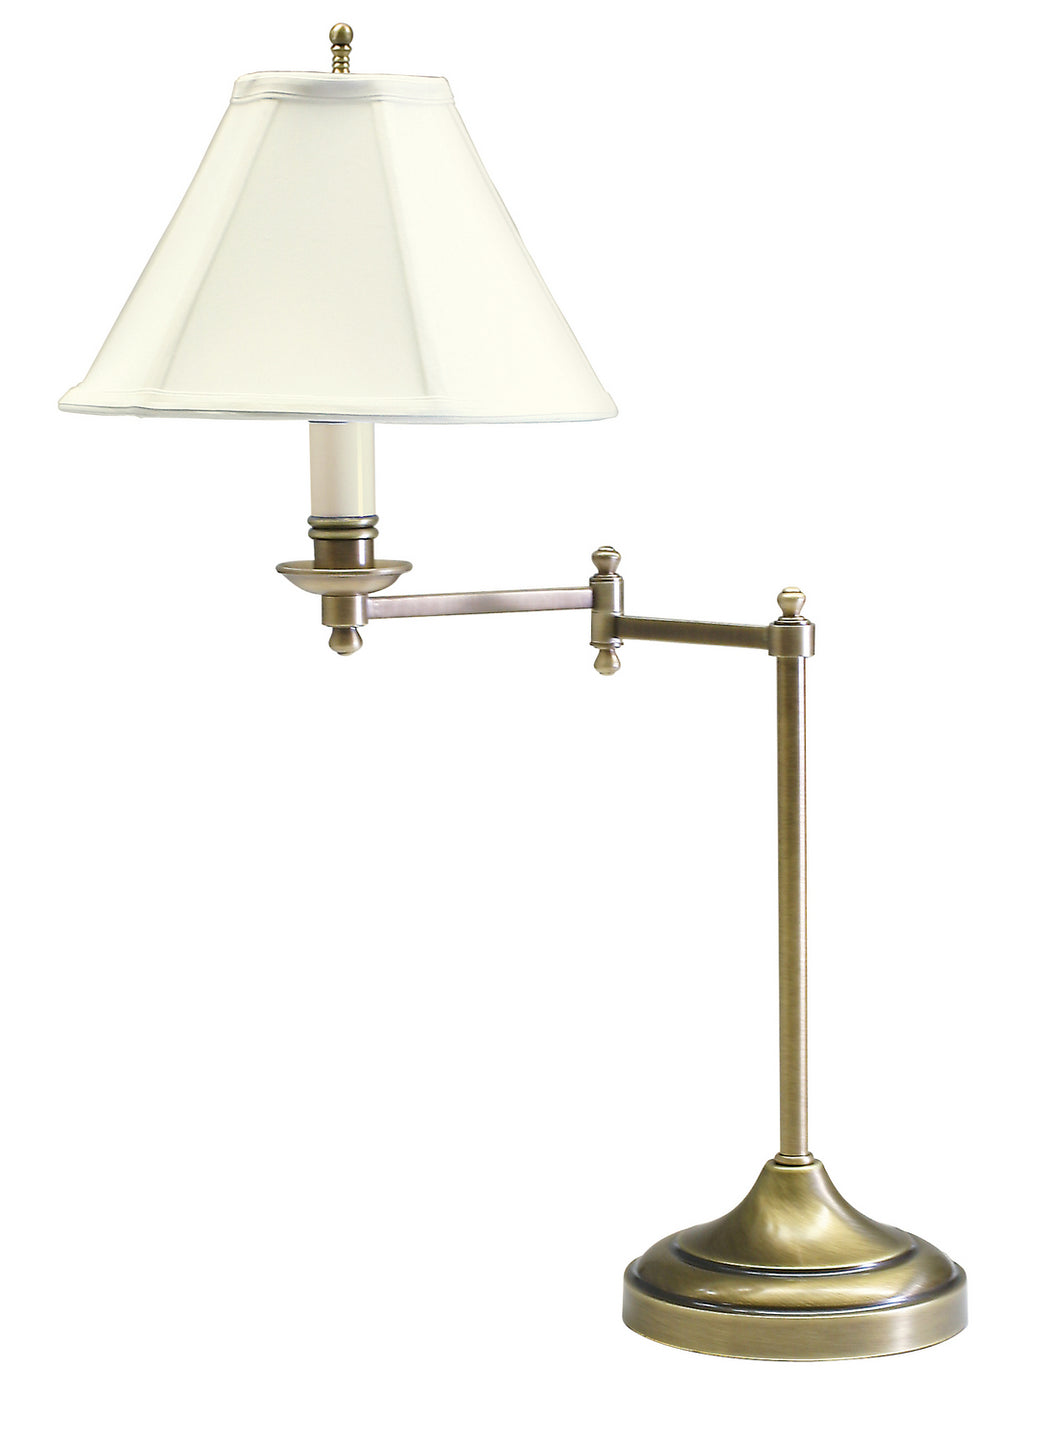 House of Troy - CL251-AB - One Light Table Lamp - Club